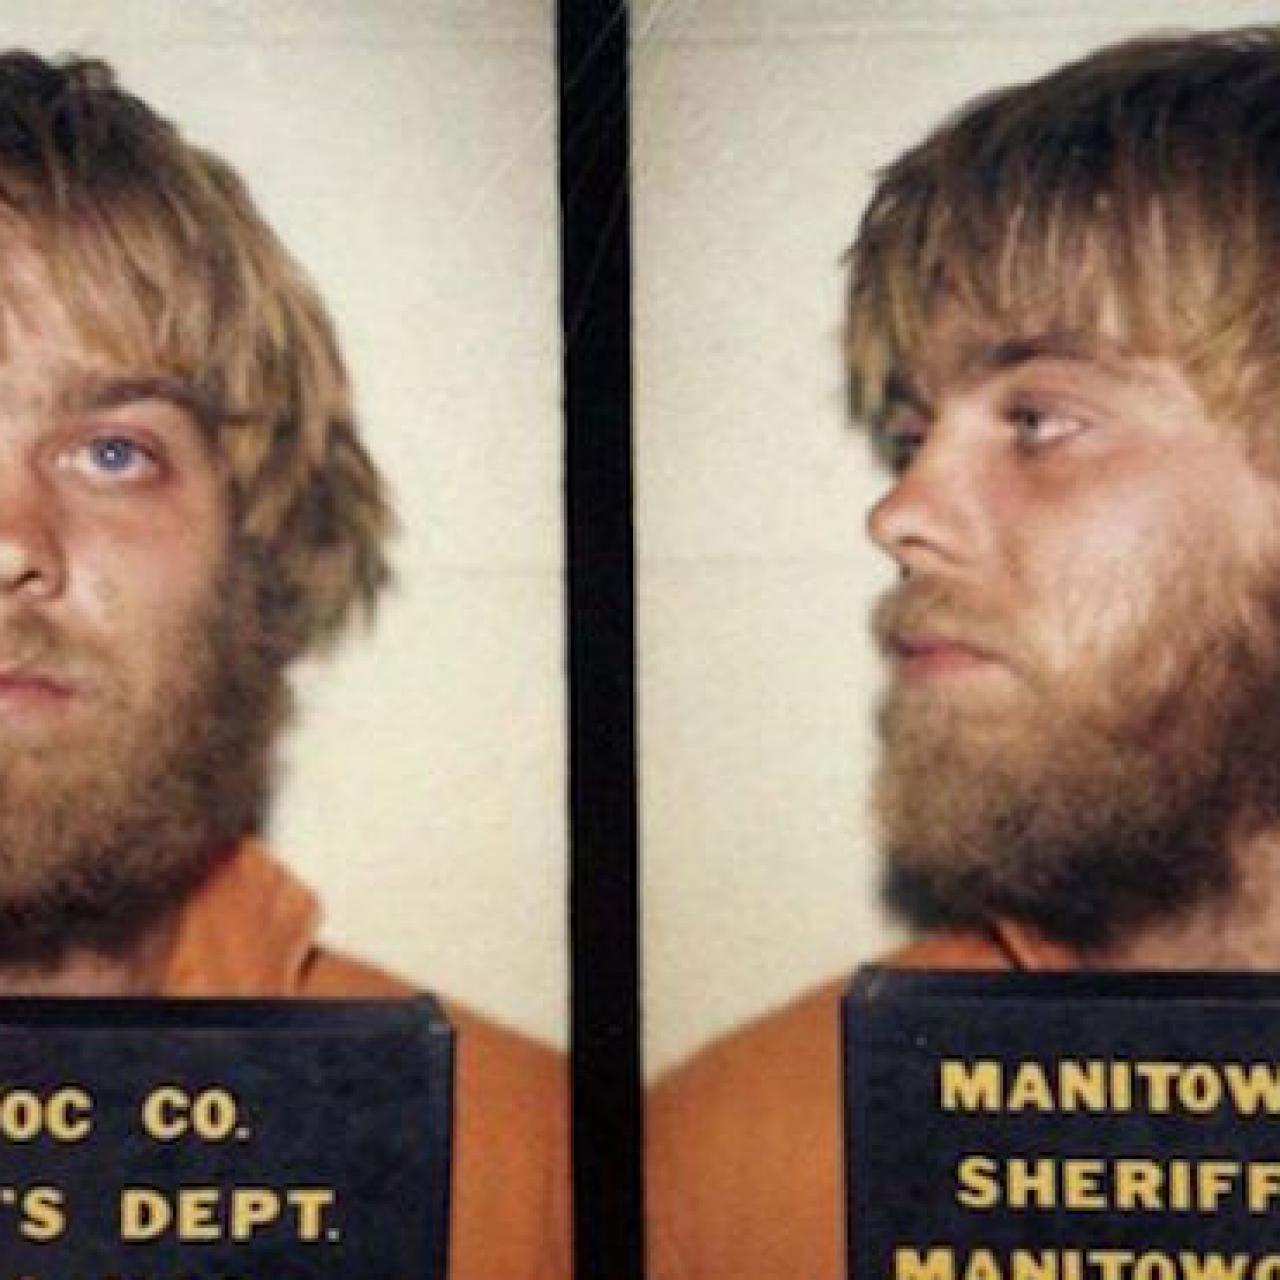 Investigation Discovery to Air Steven Avery Follow-up Special